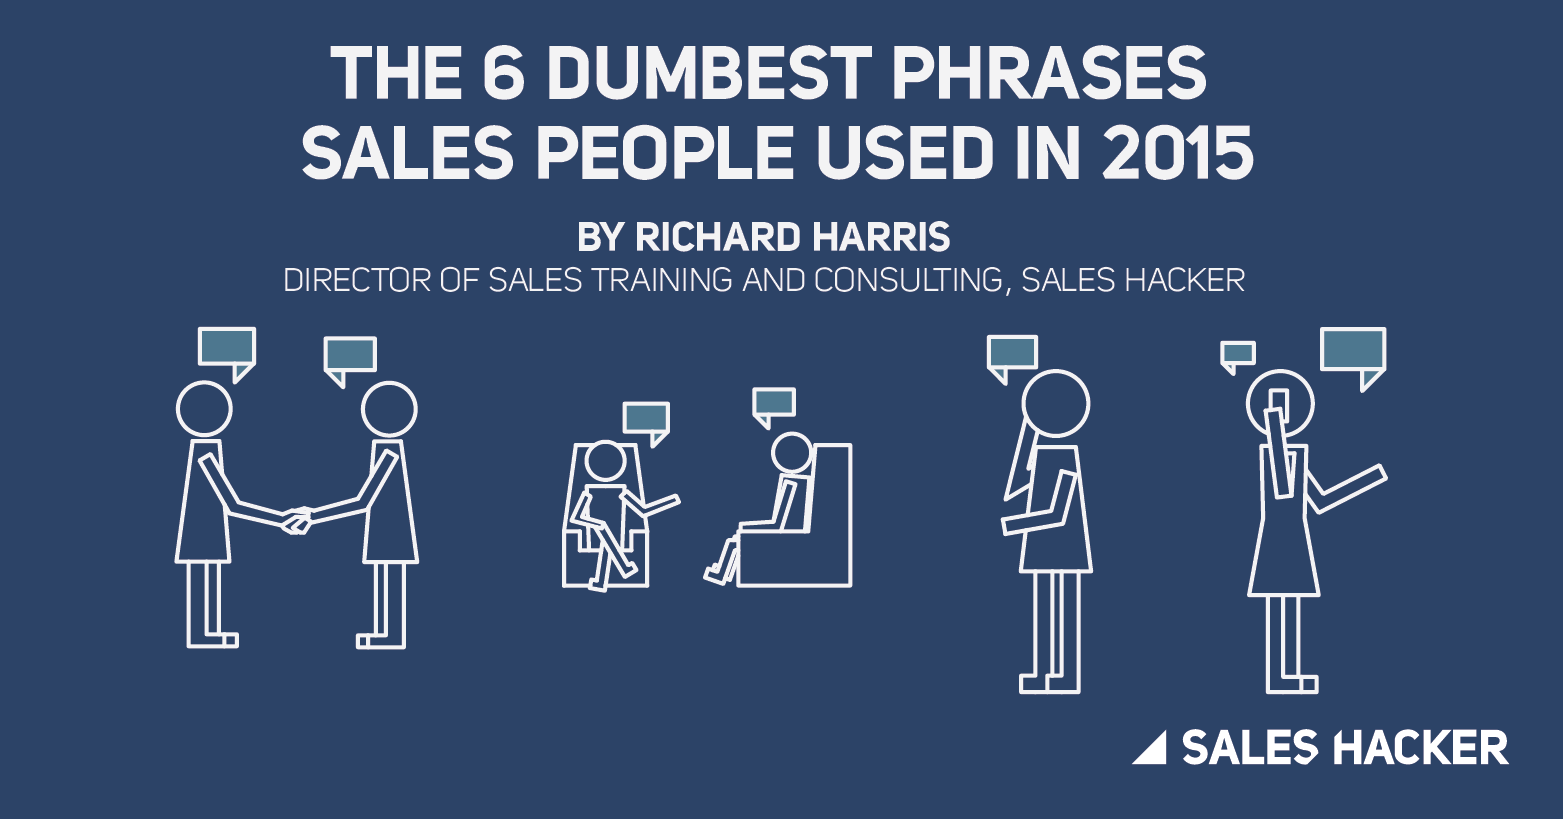 the 6 dumbest phrases sales people used in 2015